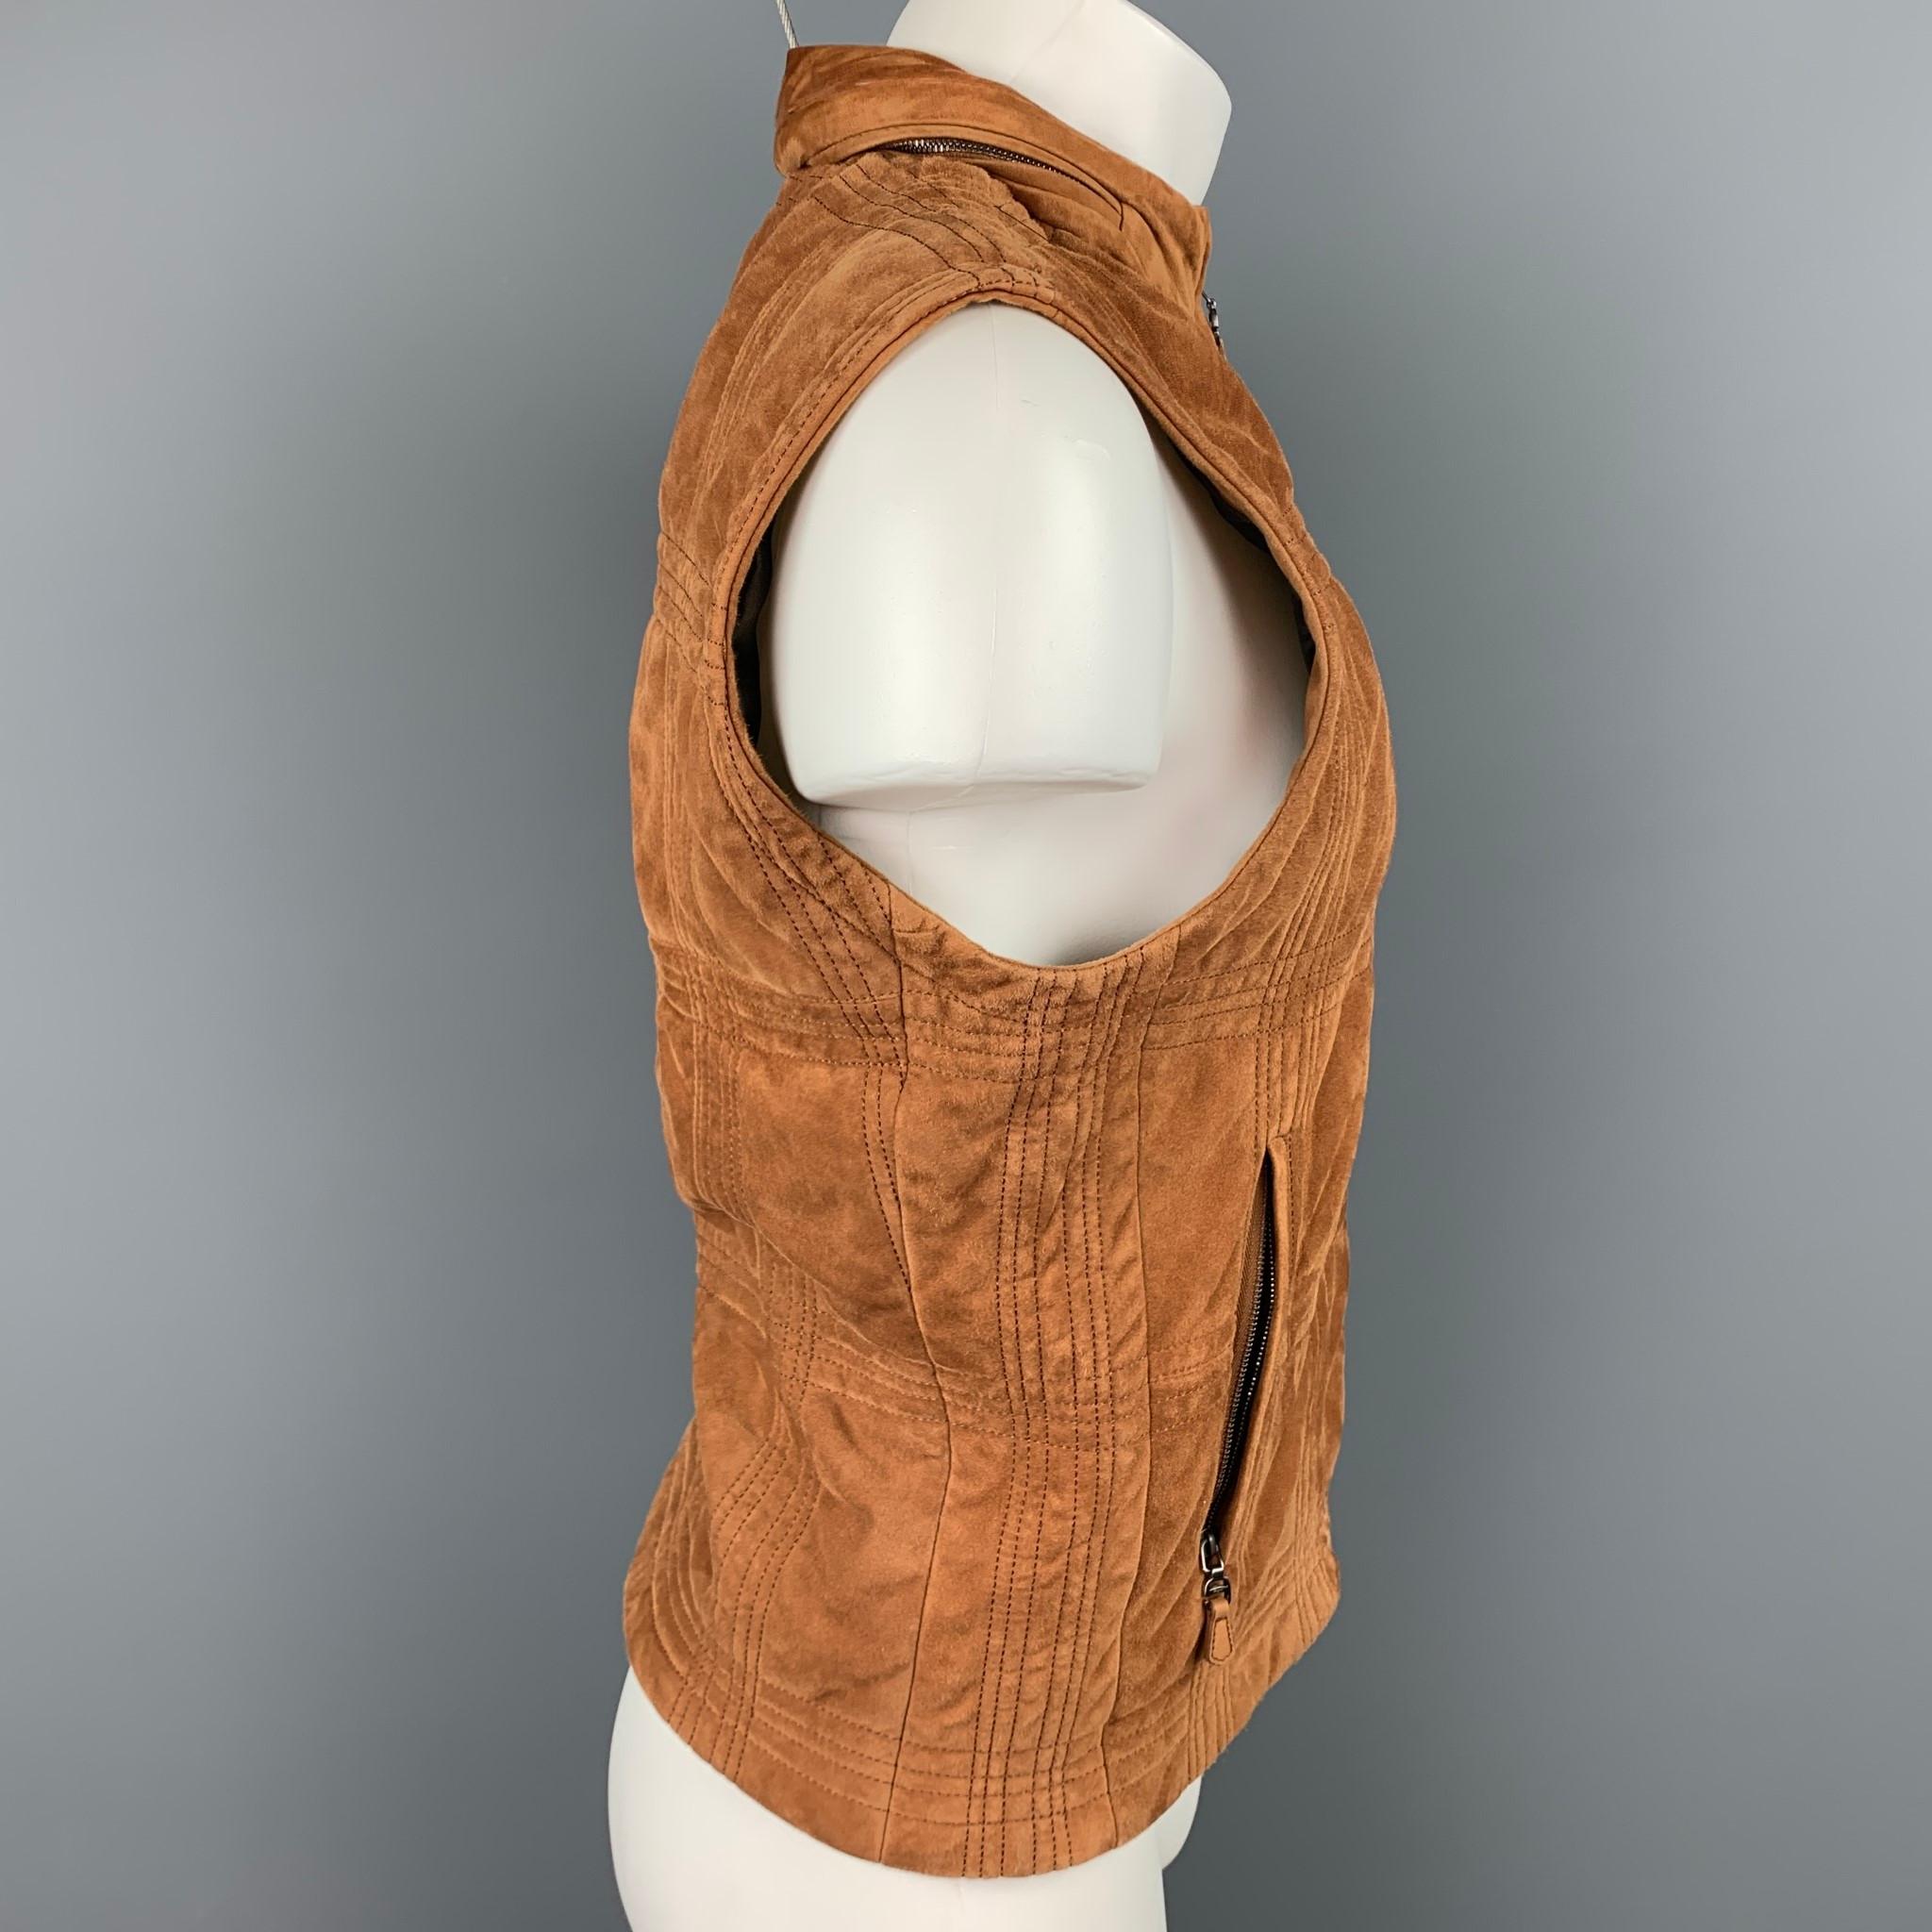 SALVATORE FERRAGAMO vest comes in a tan suede with a monogram print liner featuring a hidden hood design, top stitching, slit pockets, and a full zip closure. Made in Italy.

Very Good Pre-Owned Condition.
Marked: IT 52

Measurements:

Shoulder: